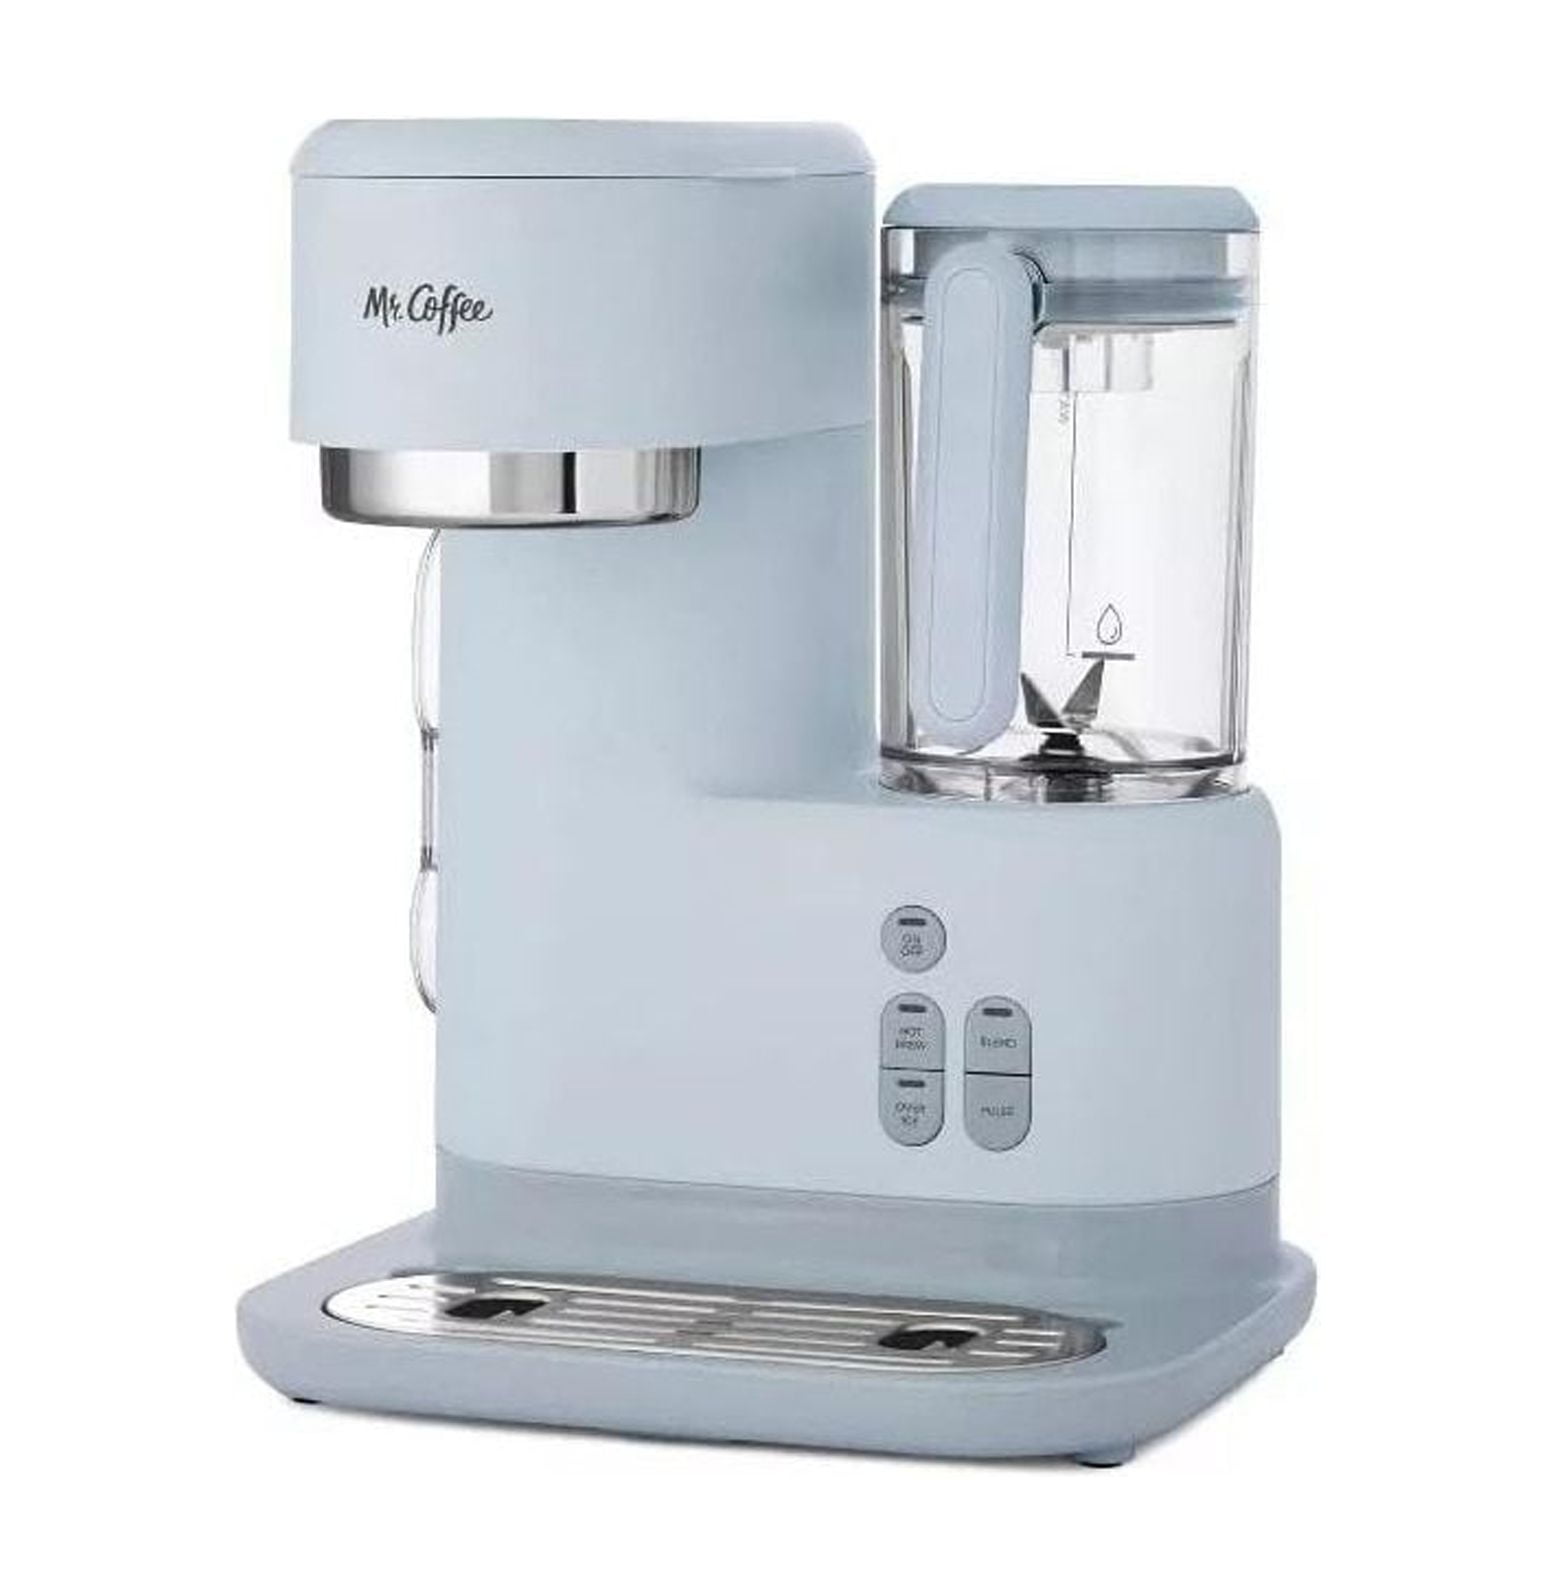 Mr. Coffee Cafe Frappe Maker Automatic Frozen Coffee Drink Machine